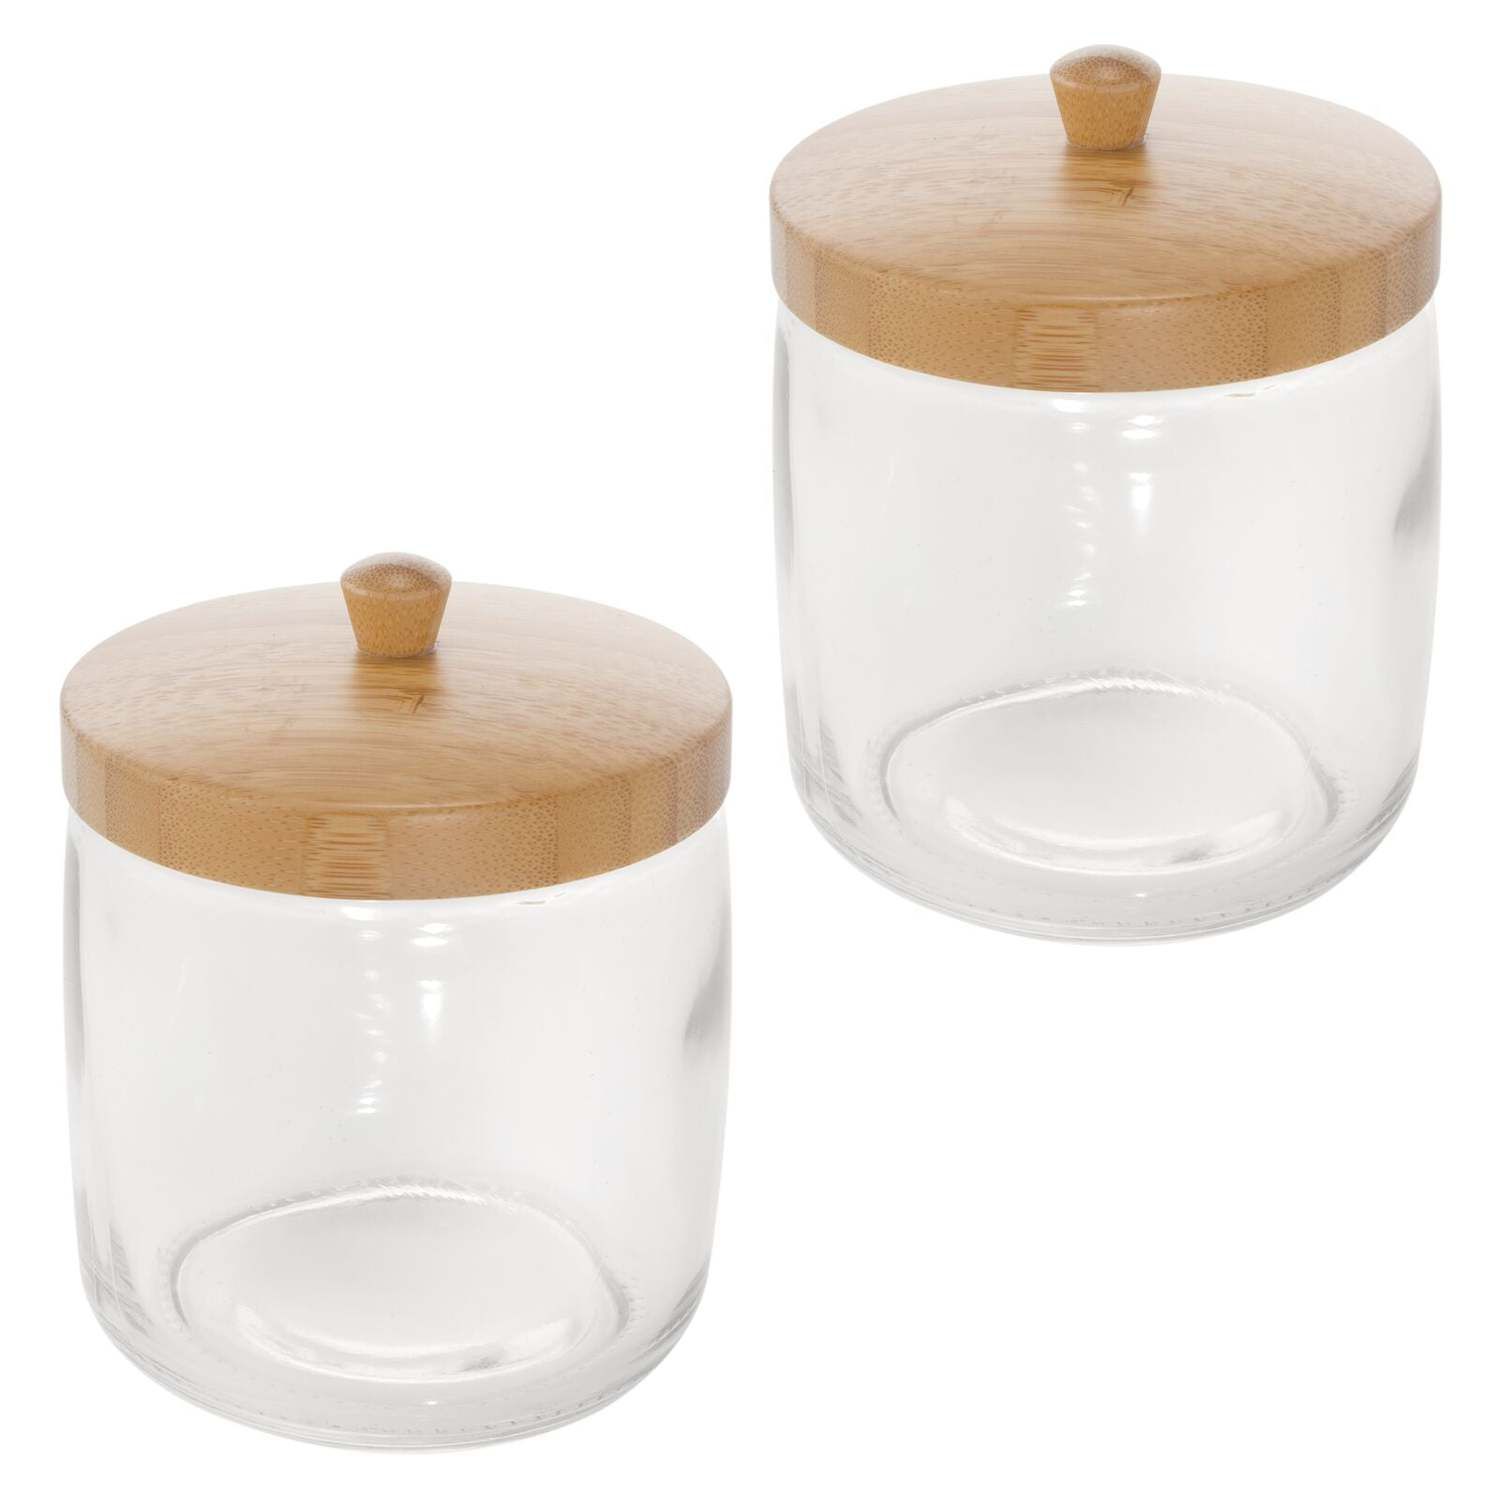 mDesign Acrylic Kitchen Apothecary Airtight Canister Jar, Set of 4